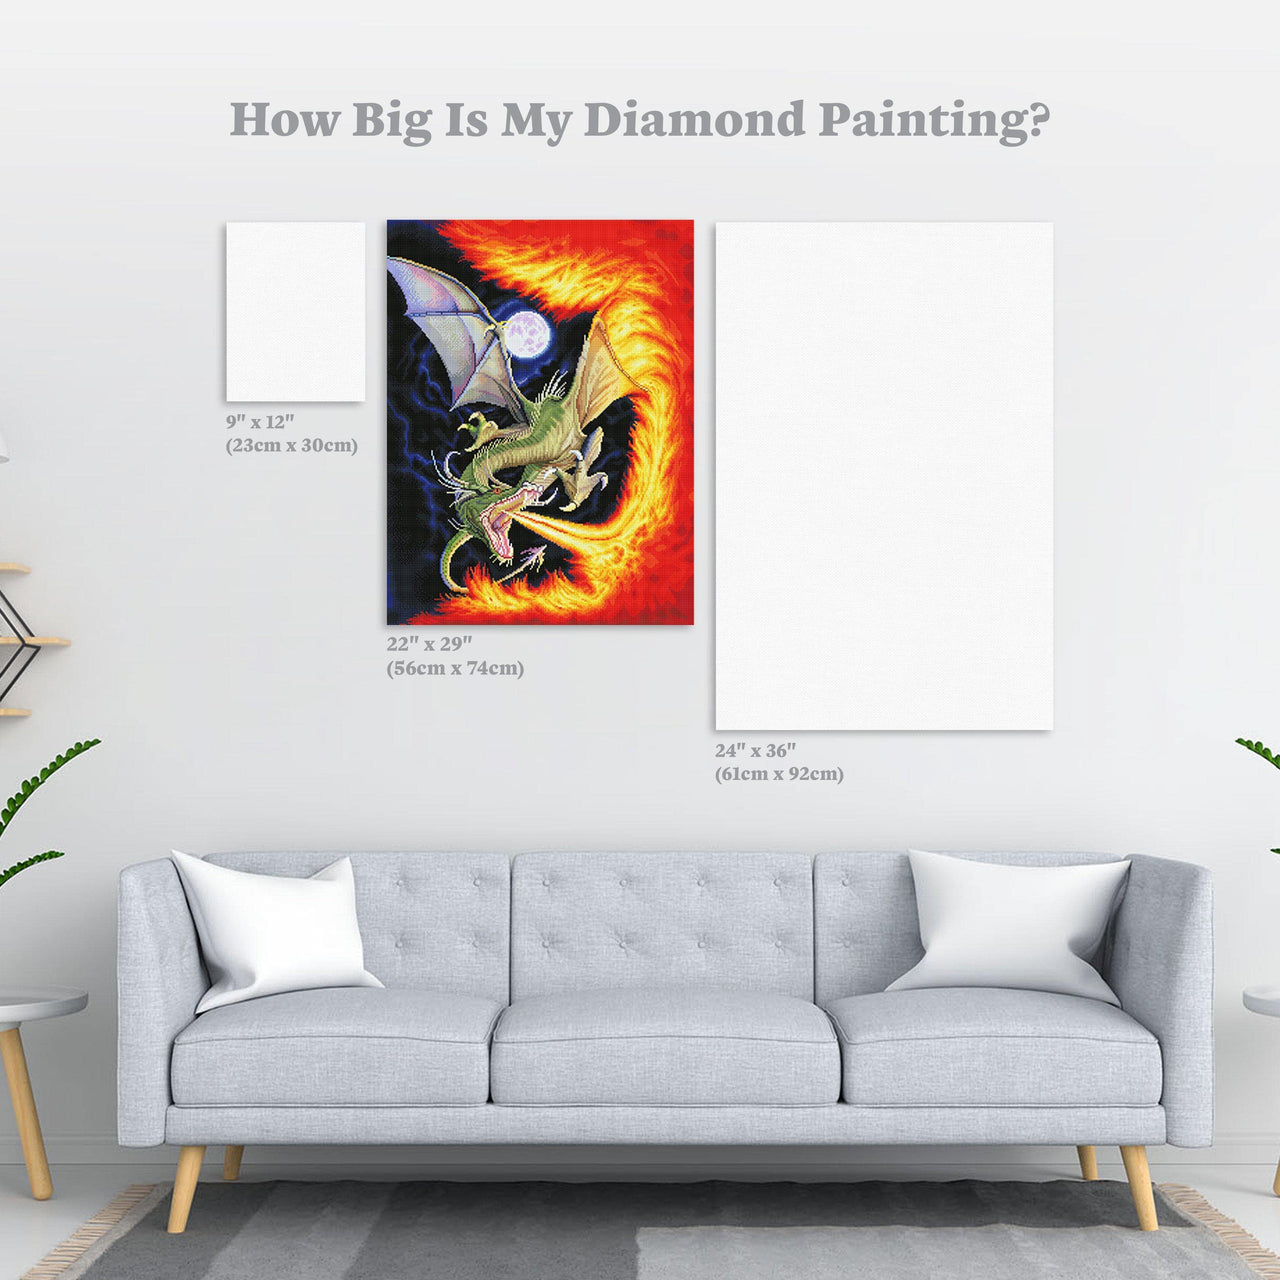 Diamond Painting Dragon of Fire 22" x 29″ (56cm x 74cm) / Square With 66 Colors Including 4 ABs / 64,533